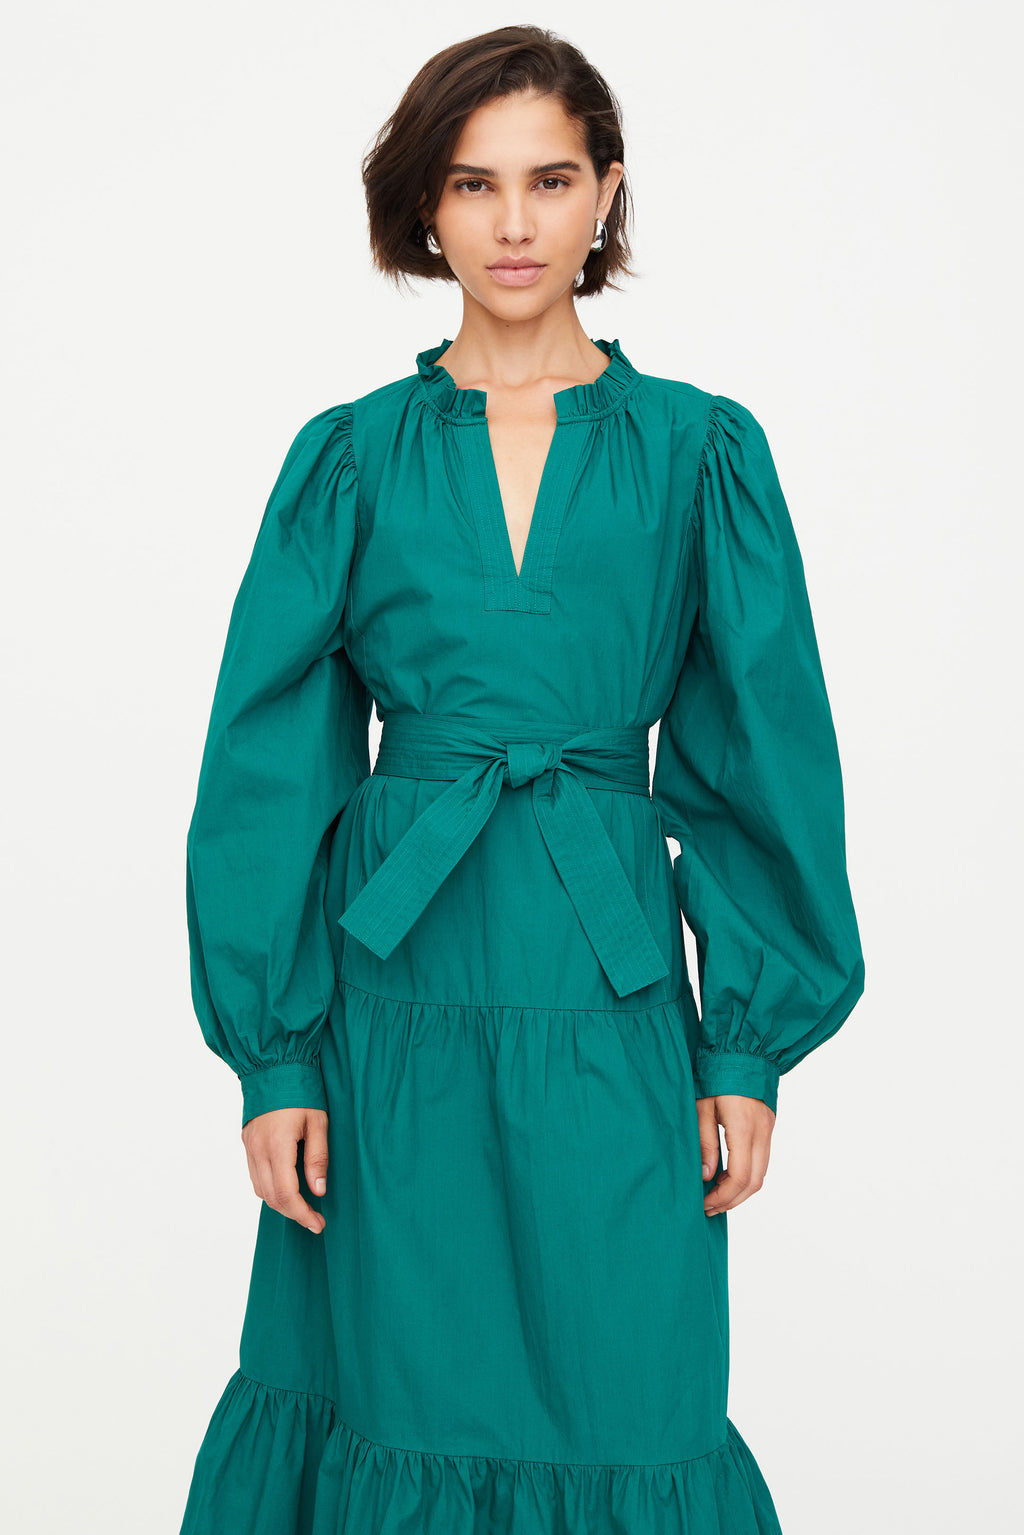 Solid green midi dress with v neckline and long sleeves 